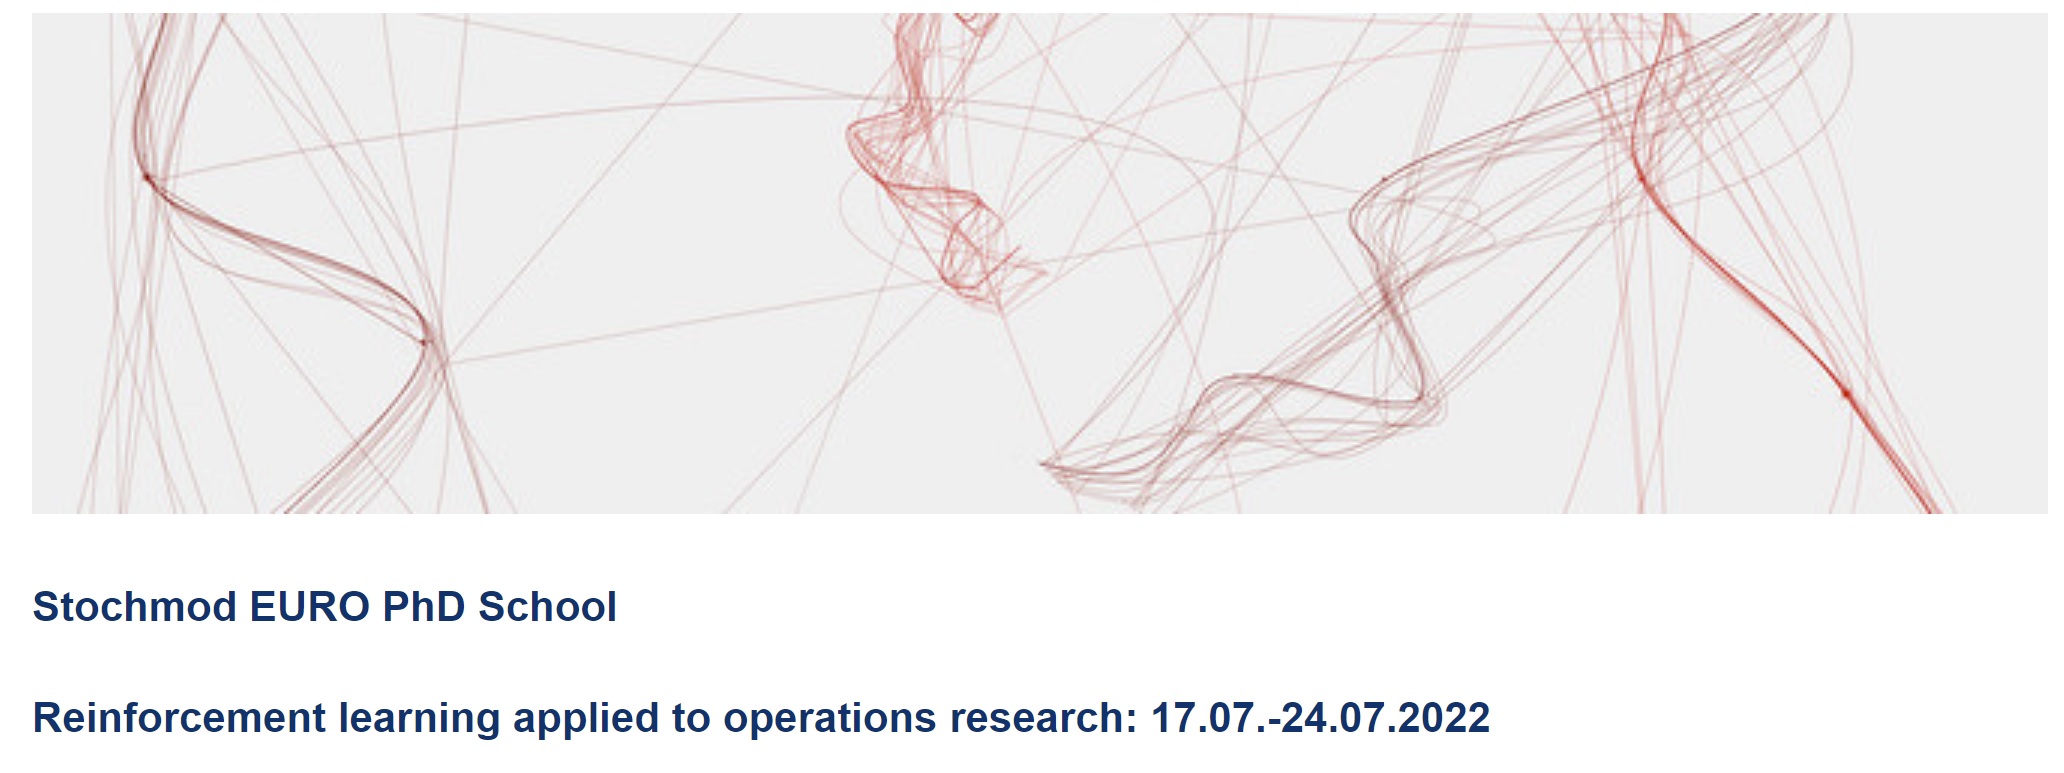 EURO PhD Summer School on Reinforcement Learning Applied to Operations Research, December 10-12, 2021, Marienheide, Germany